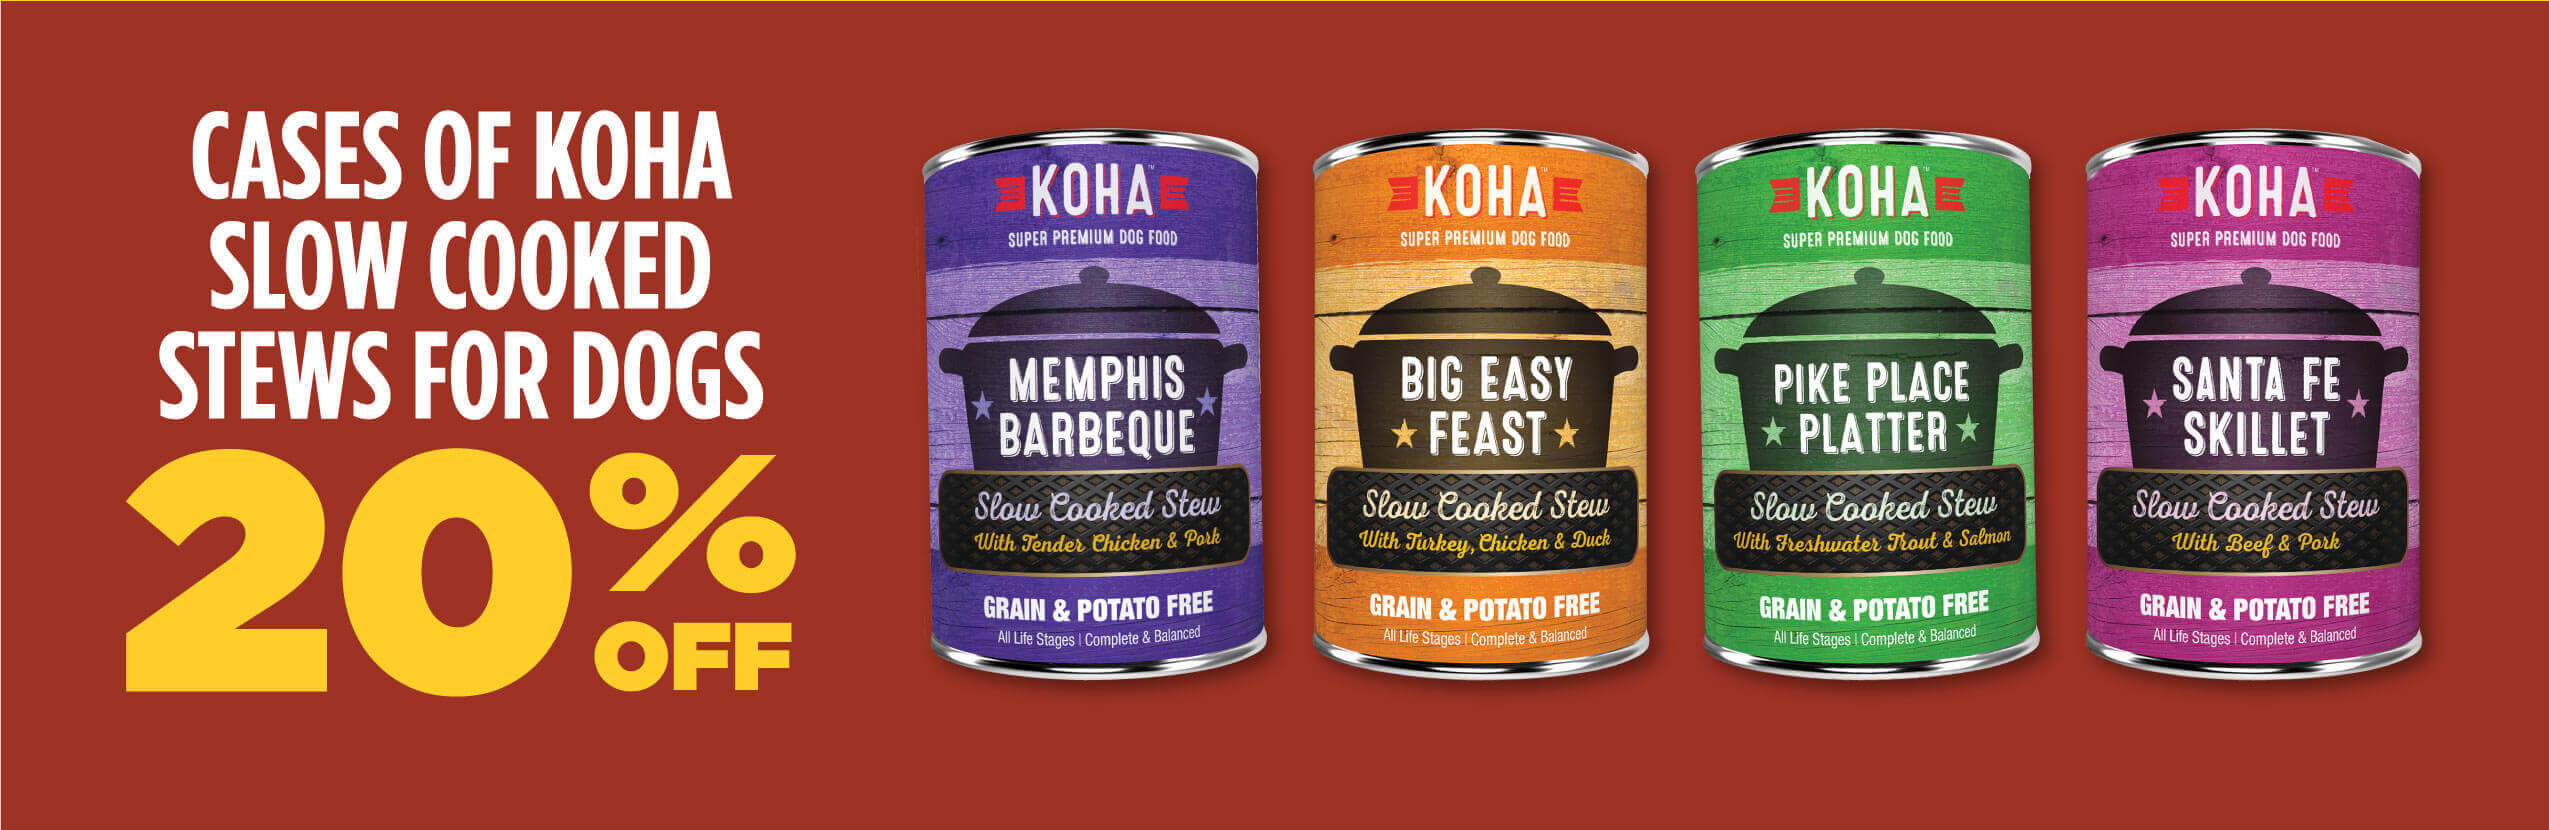 20% off Koha Slow Cooked Stews for Dogs